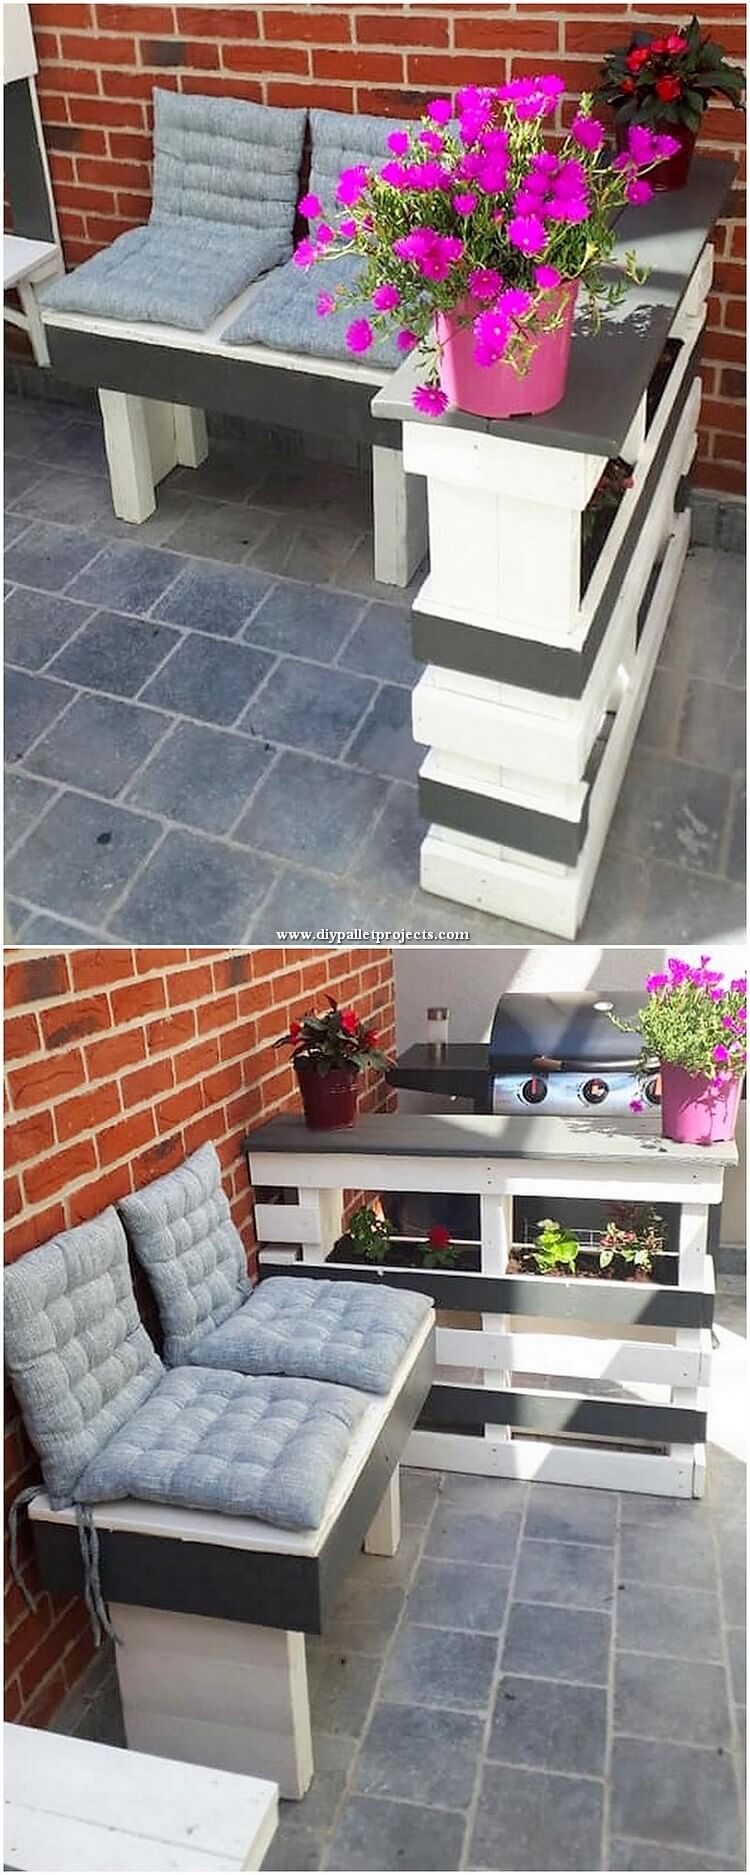 Pallet Planter Table and Bench